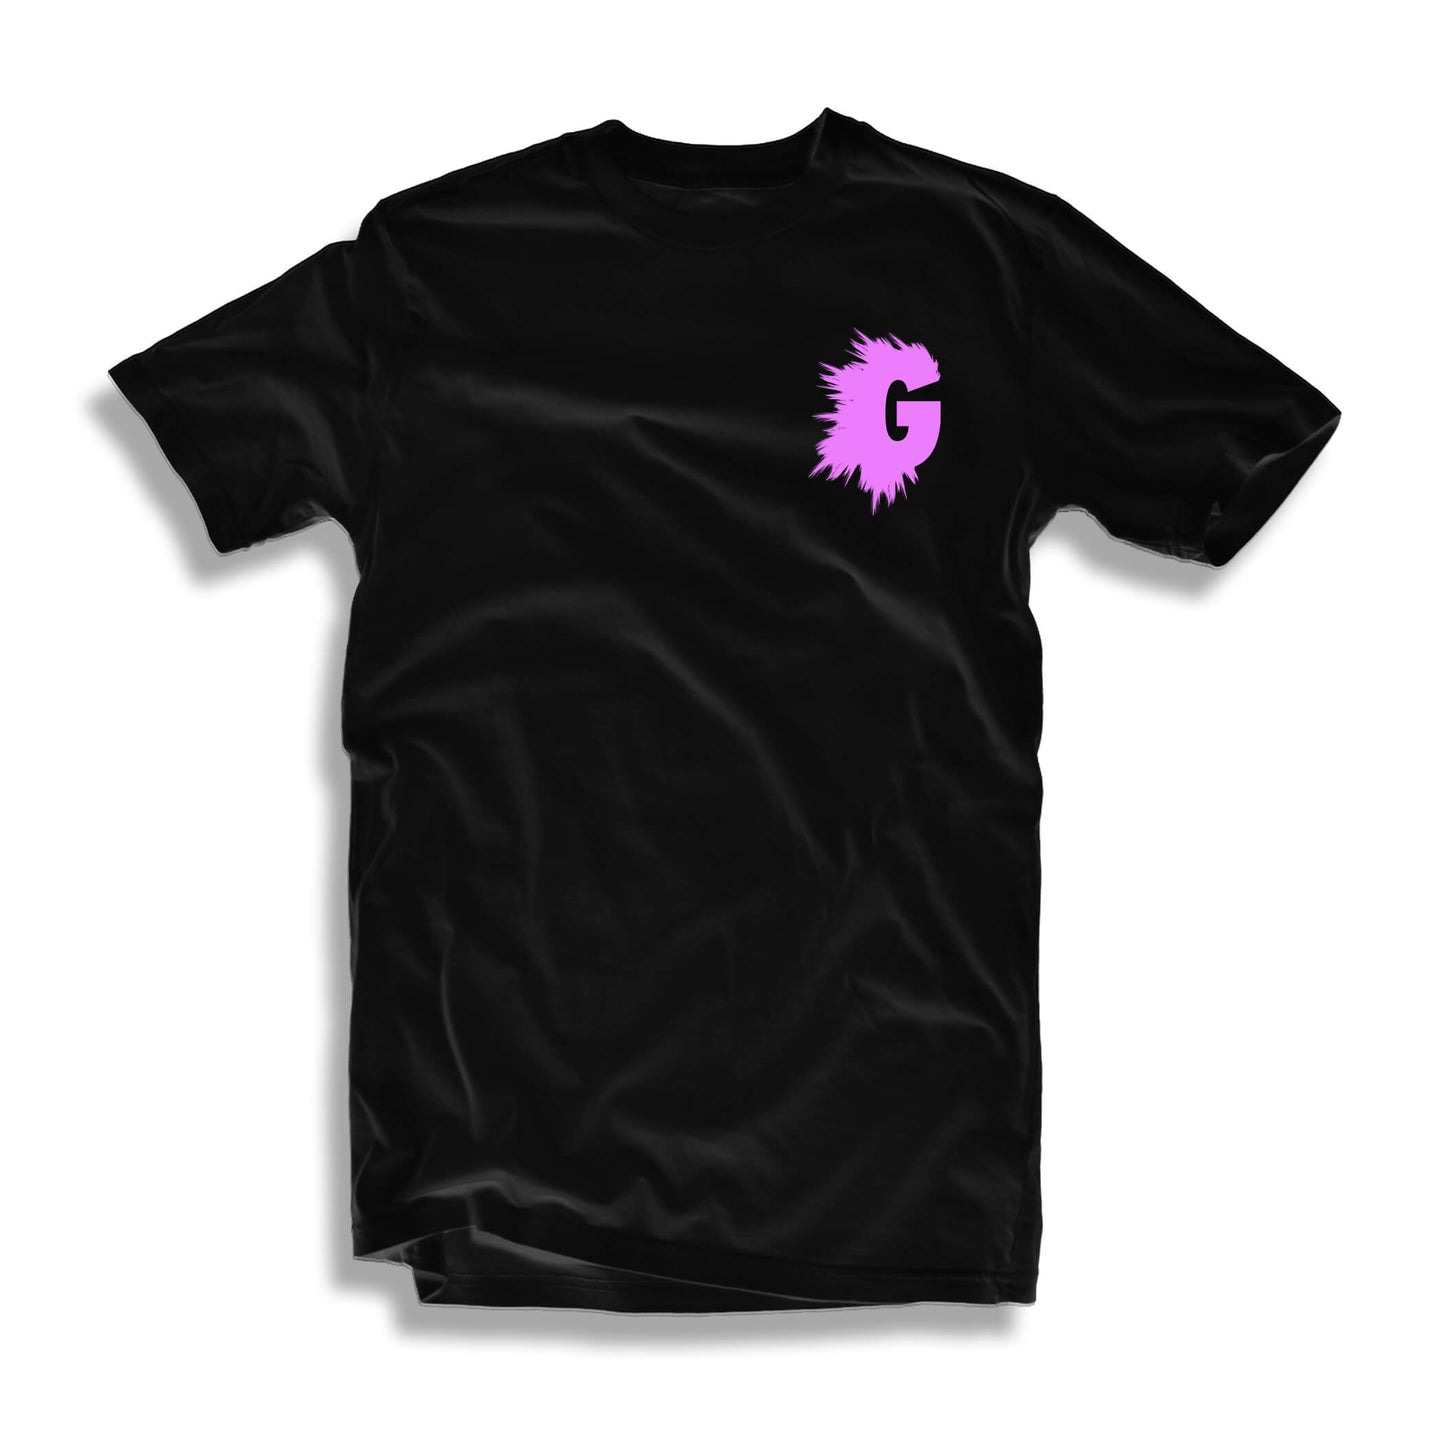 CLASSIC G LOGO T-SHIRT (MULTIPLE COLORWAYS) *ALWAYS ON SALE